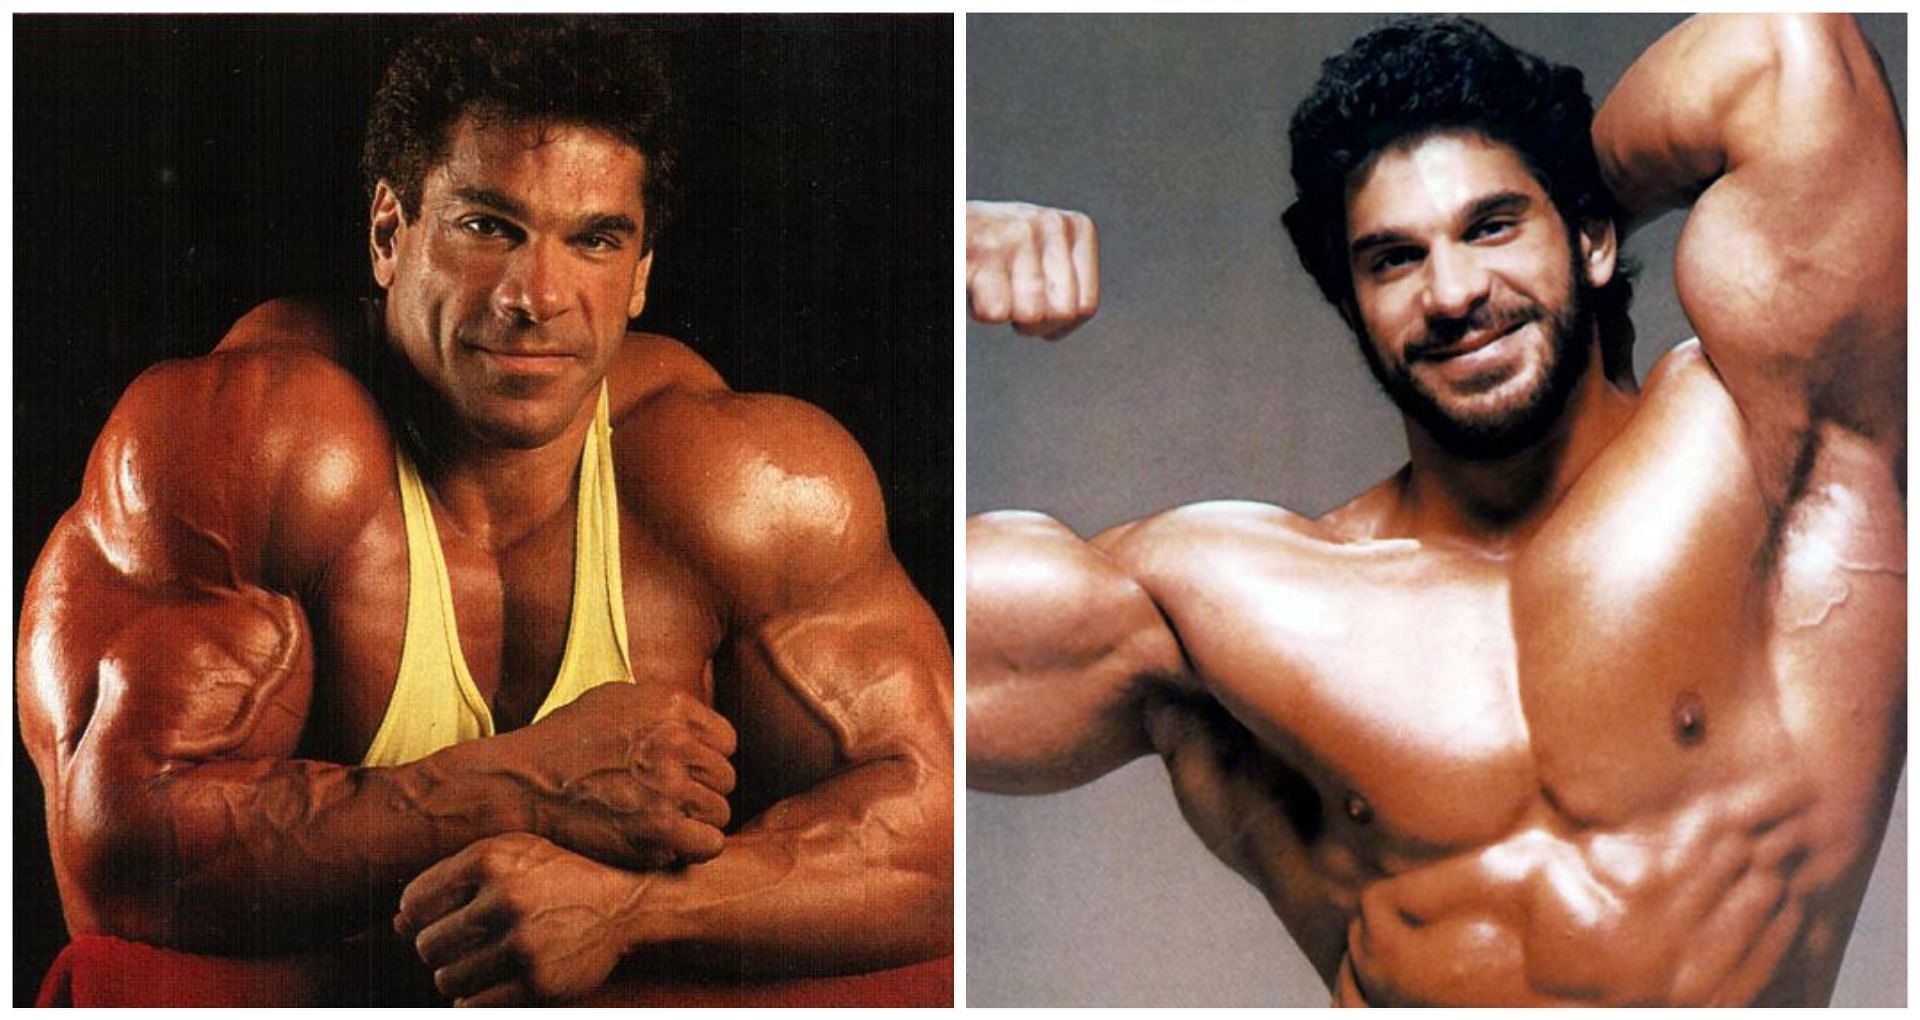 Best known for his role as The Incredible Hulk, Ferrigno had arms that measured 23 inches at his peak (Image via Flickr)